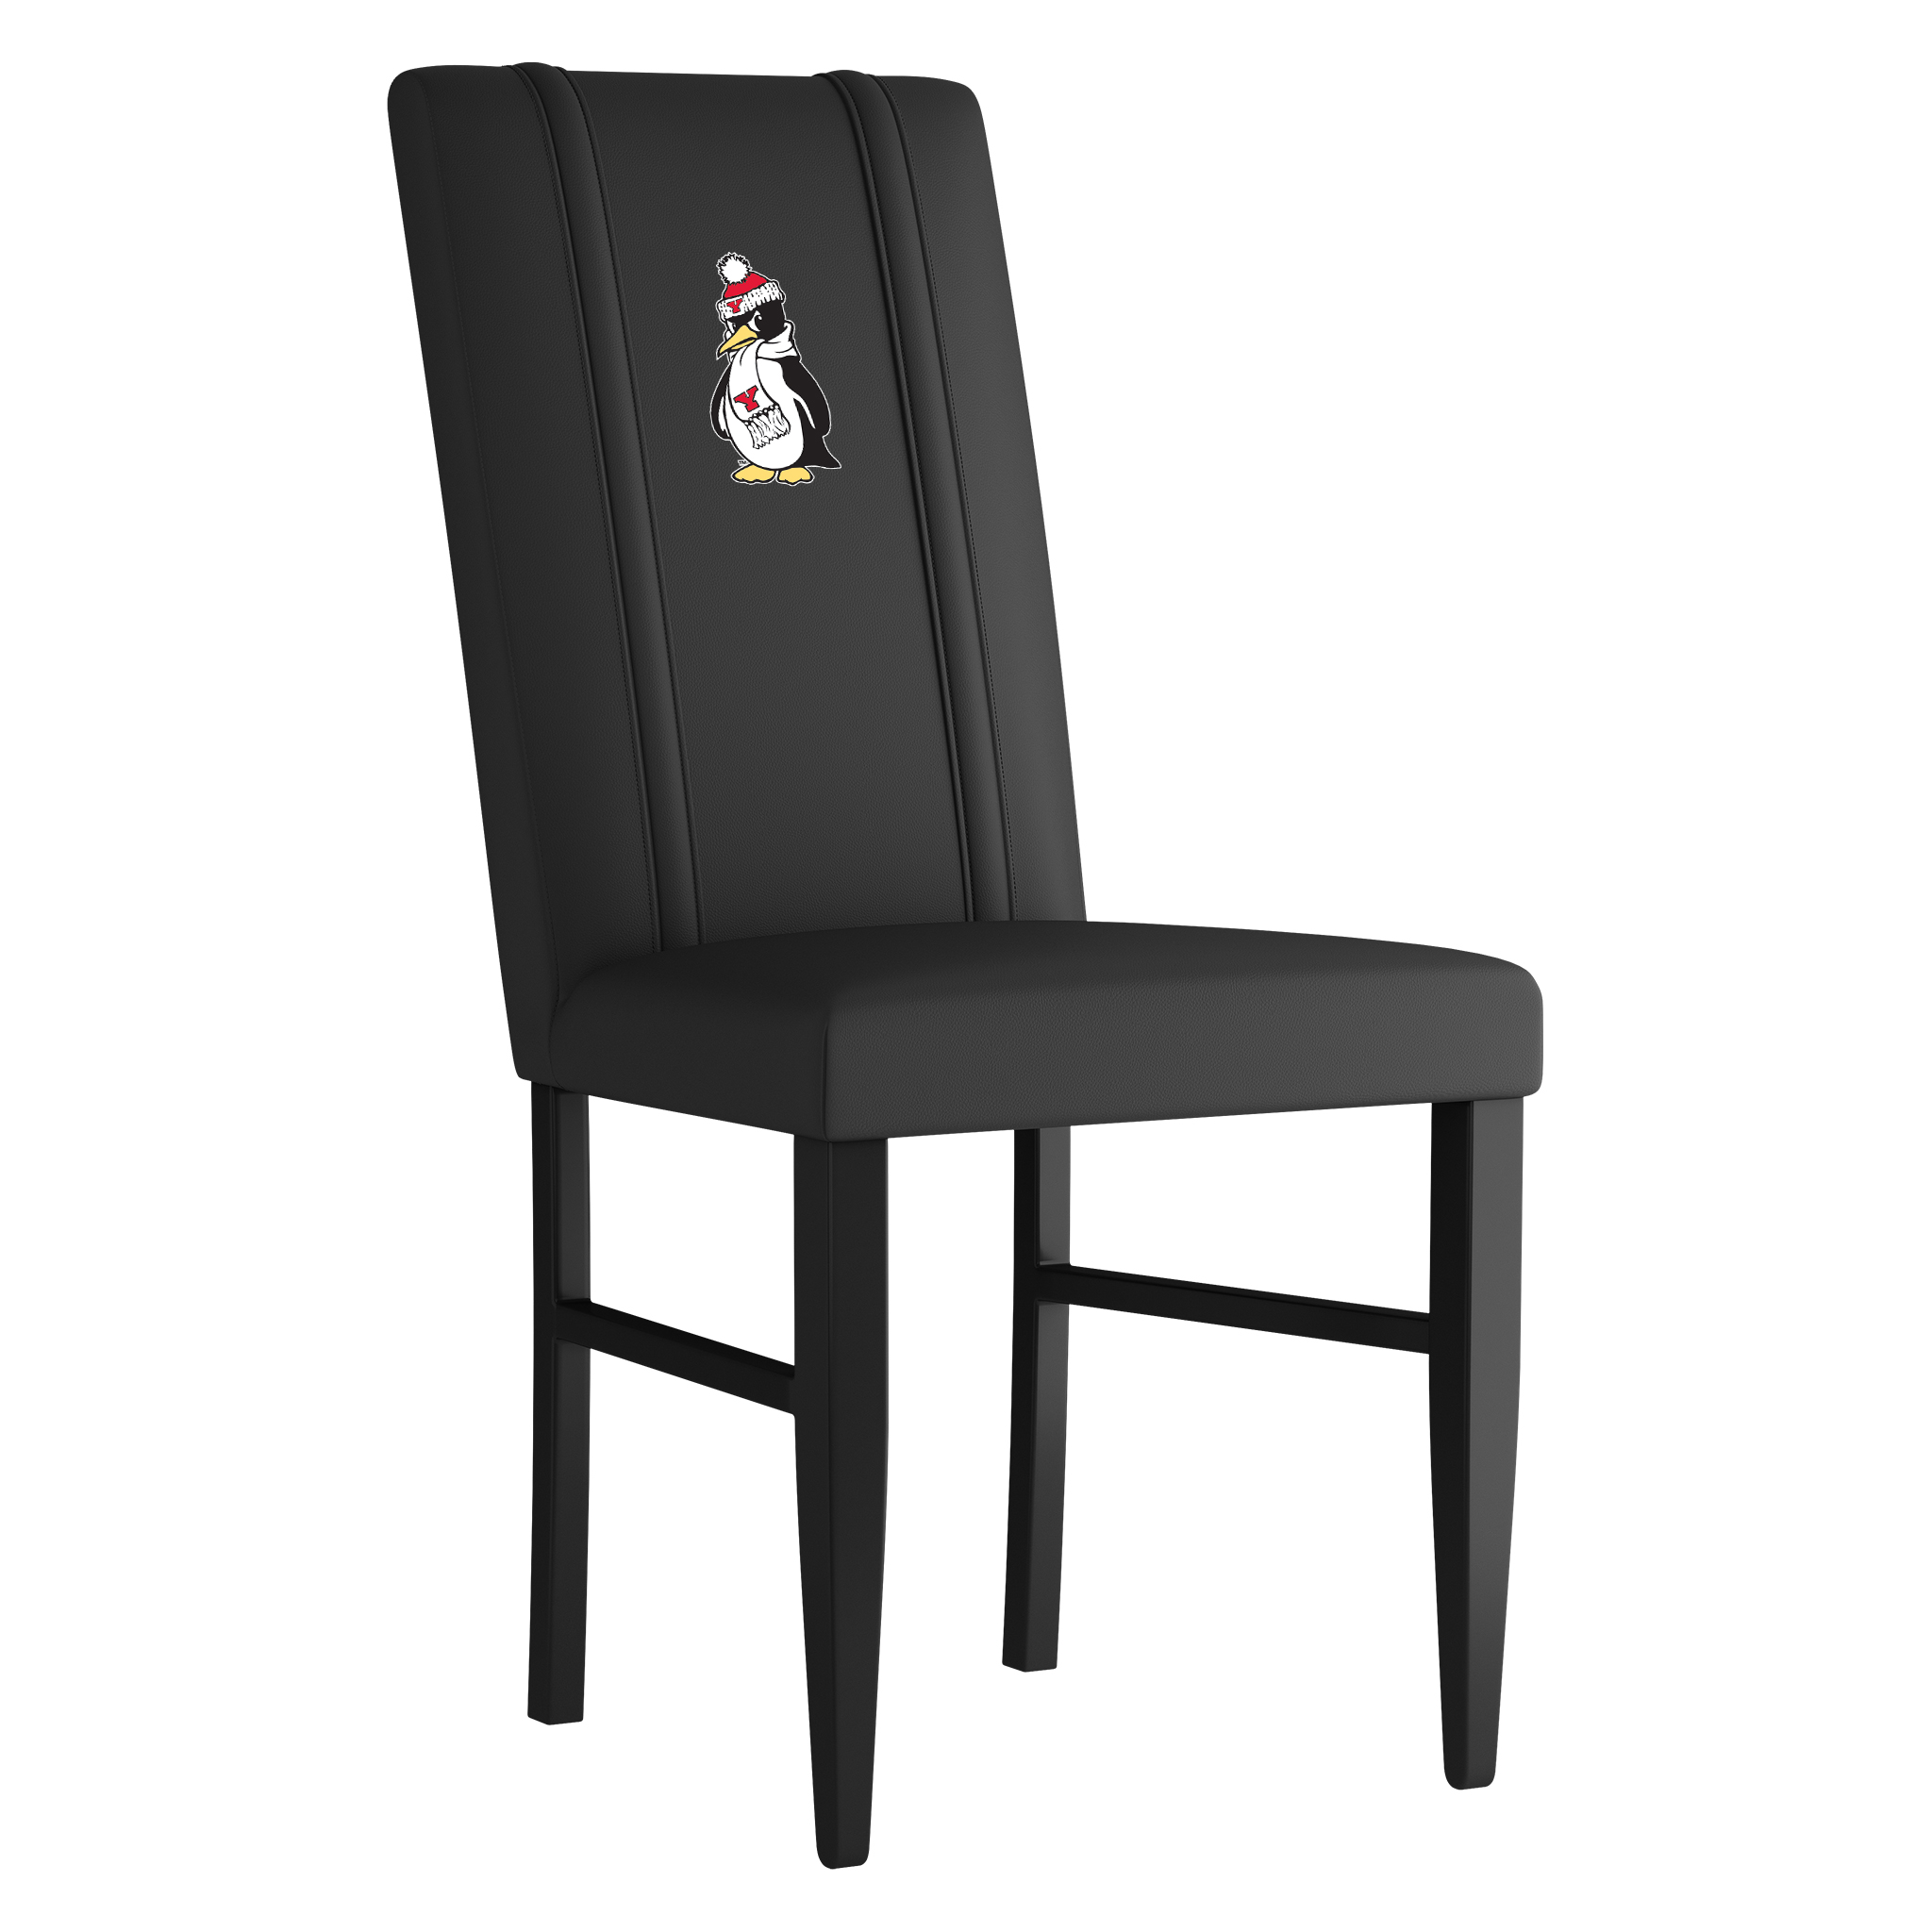 Youngstown State Penguins Side Chair 2000 With Youngstown State Penguins Logo